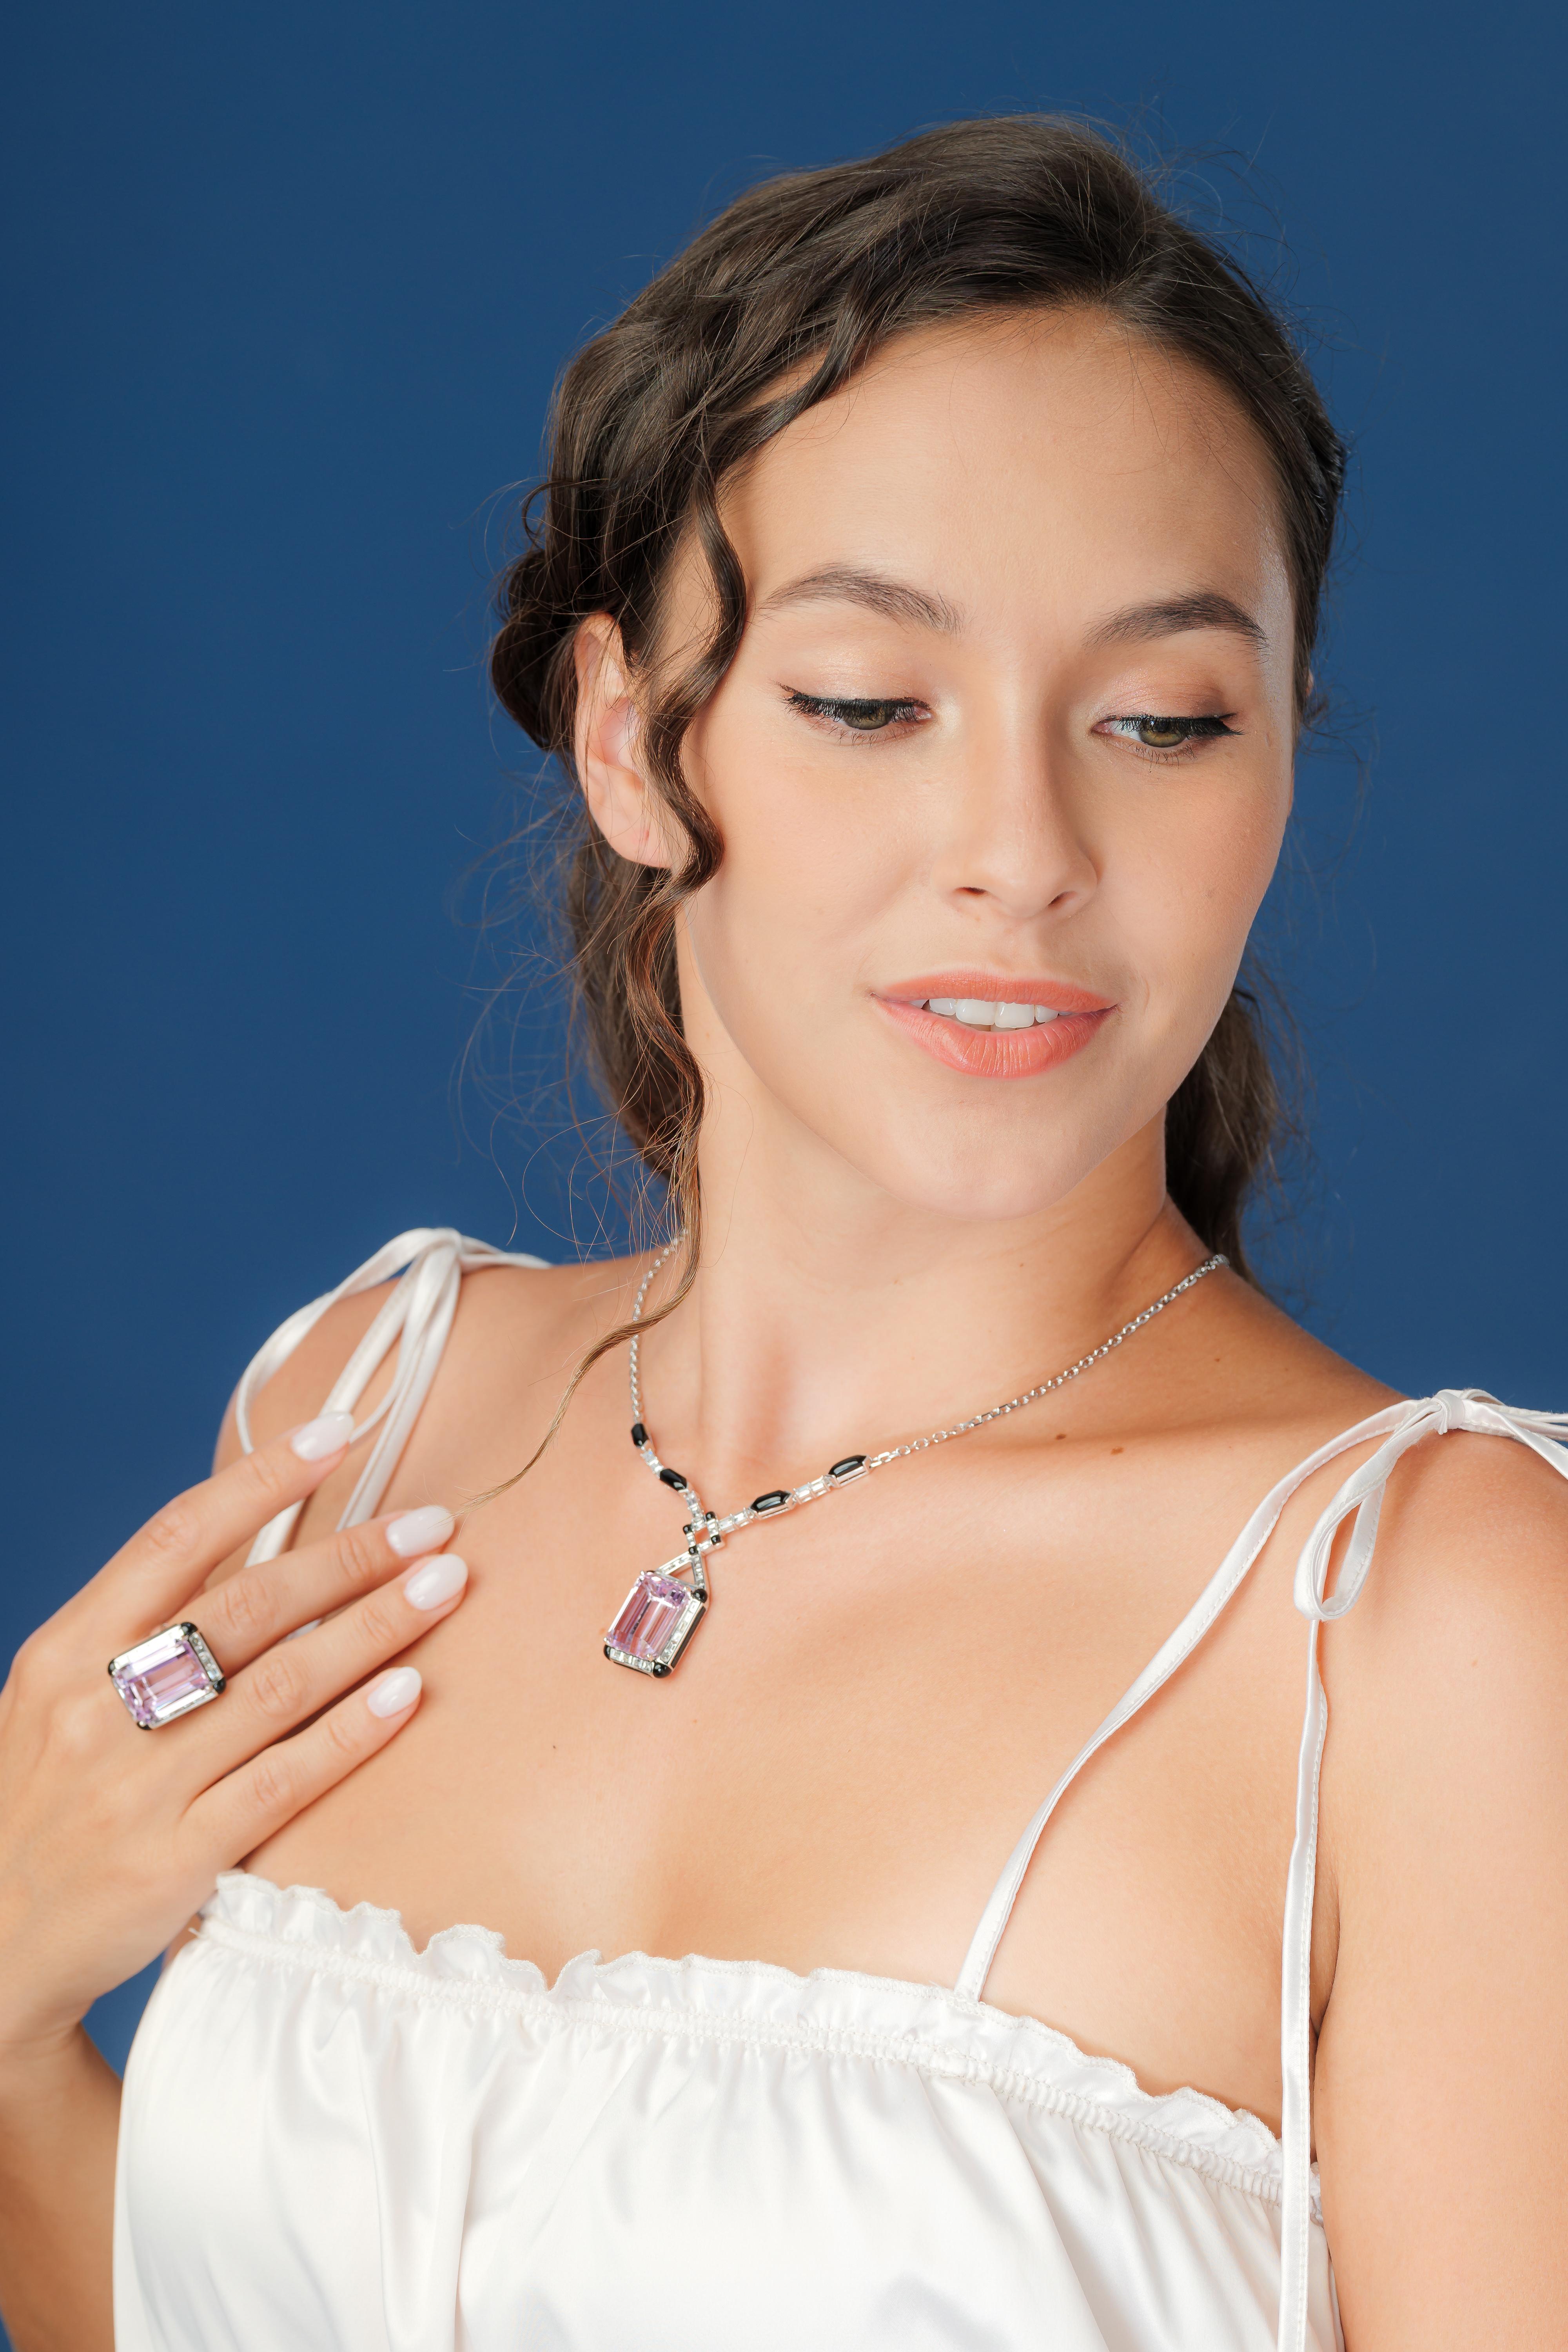 The pretty pink hues of Kunzites are often associated with love and romance. We present a unique collection of Kunzites that have been designed in an art deco style. These gorgeous gemstones are set upon an art deco frame of black onyx and baguette